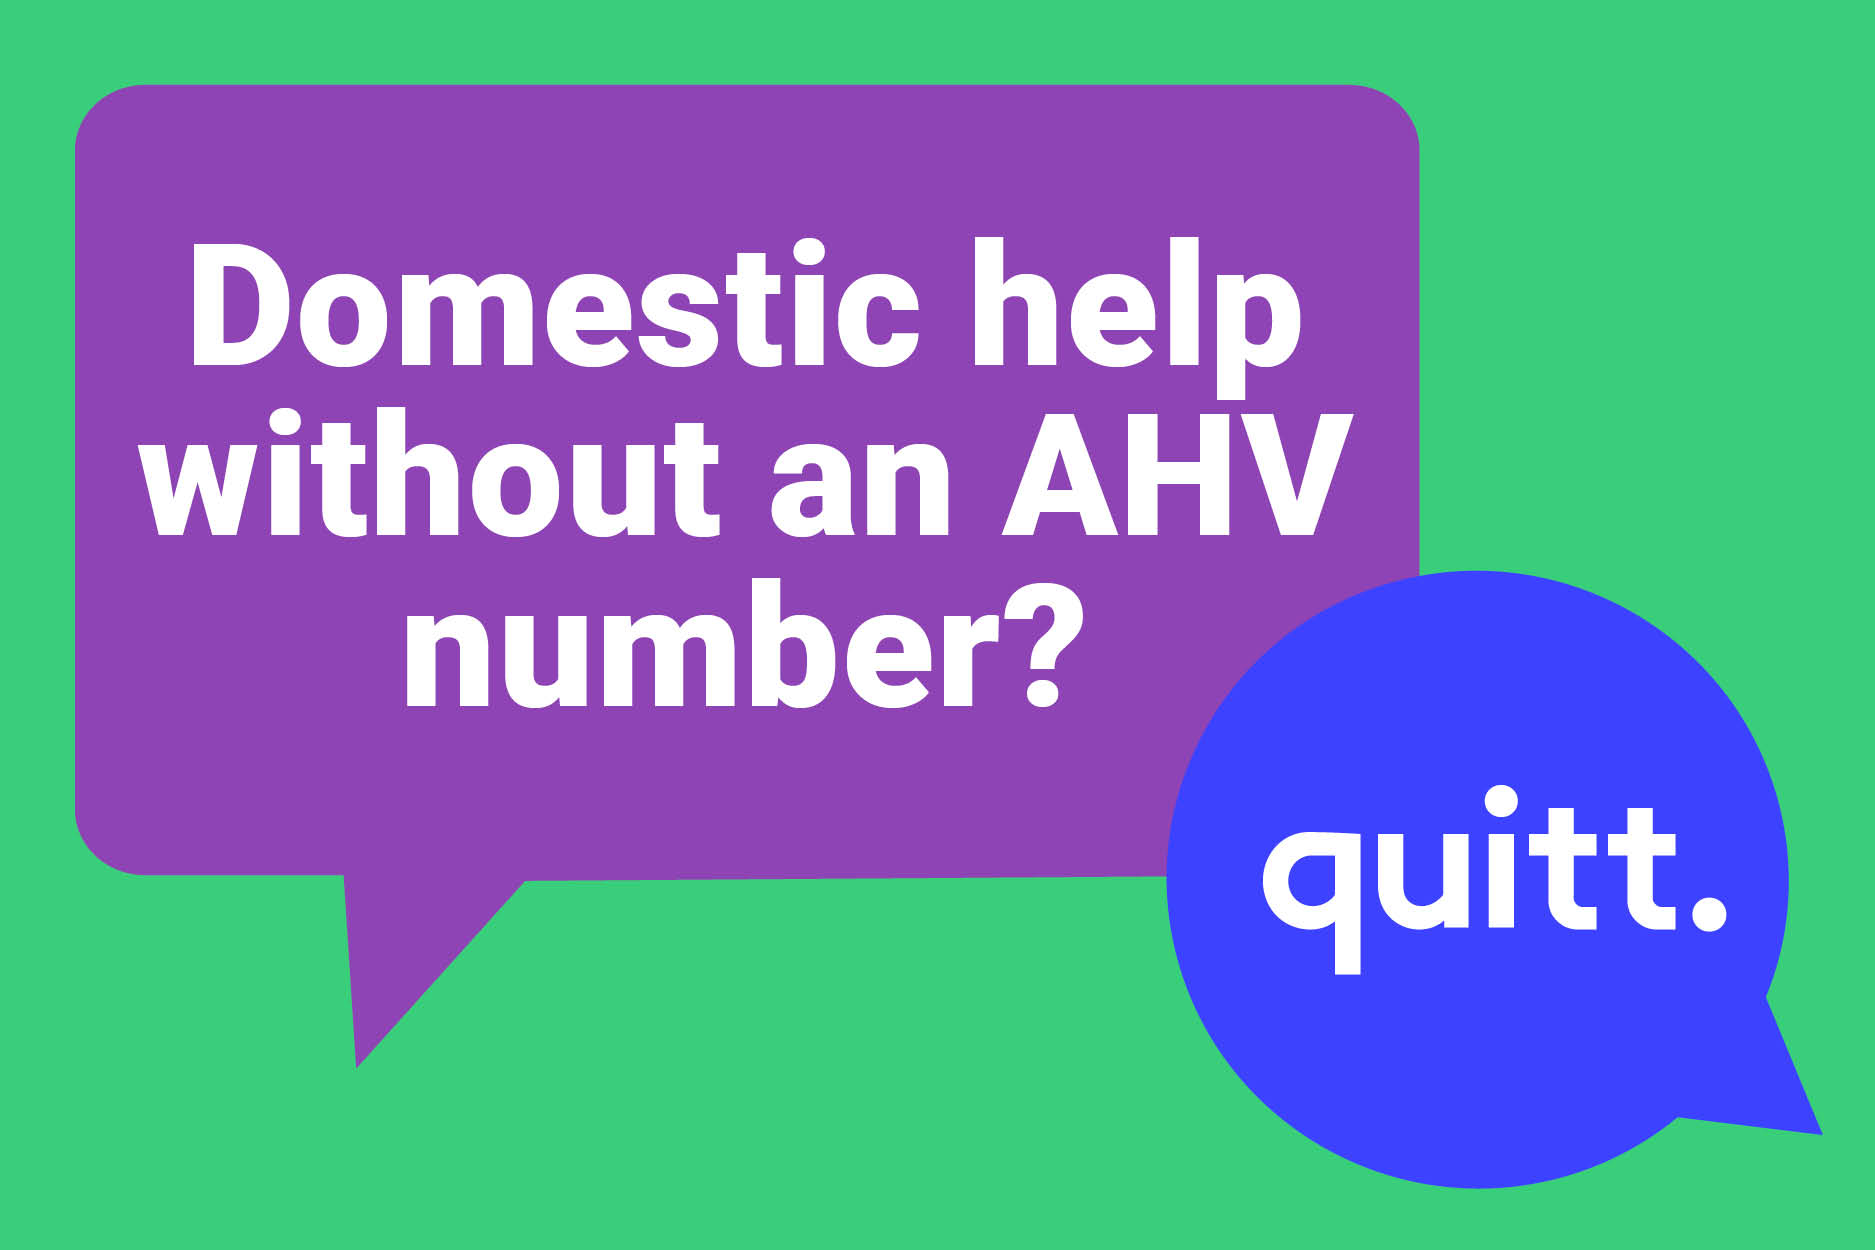 My household help has no AHV number – is that a problem?